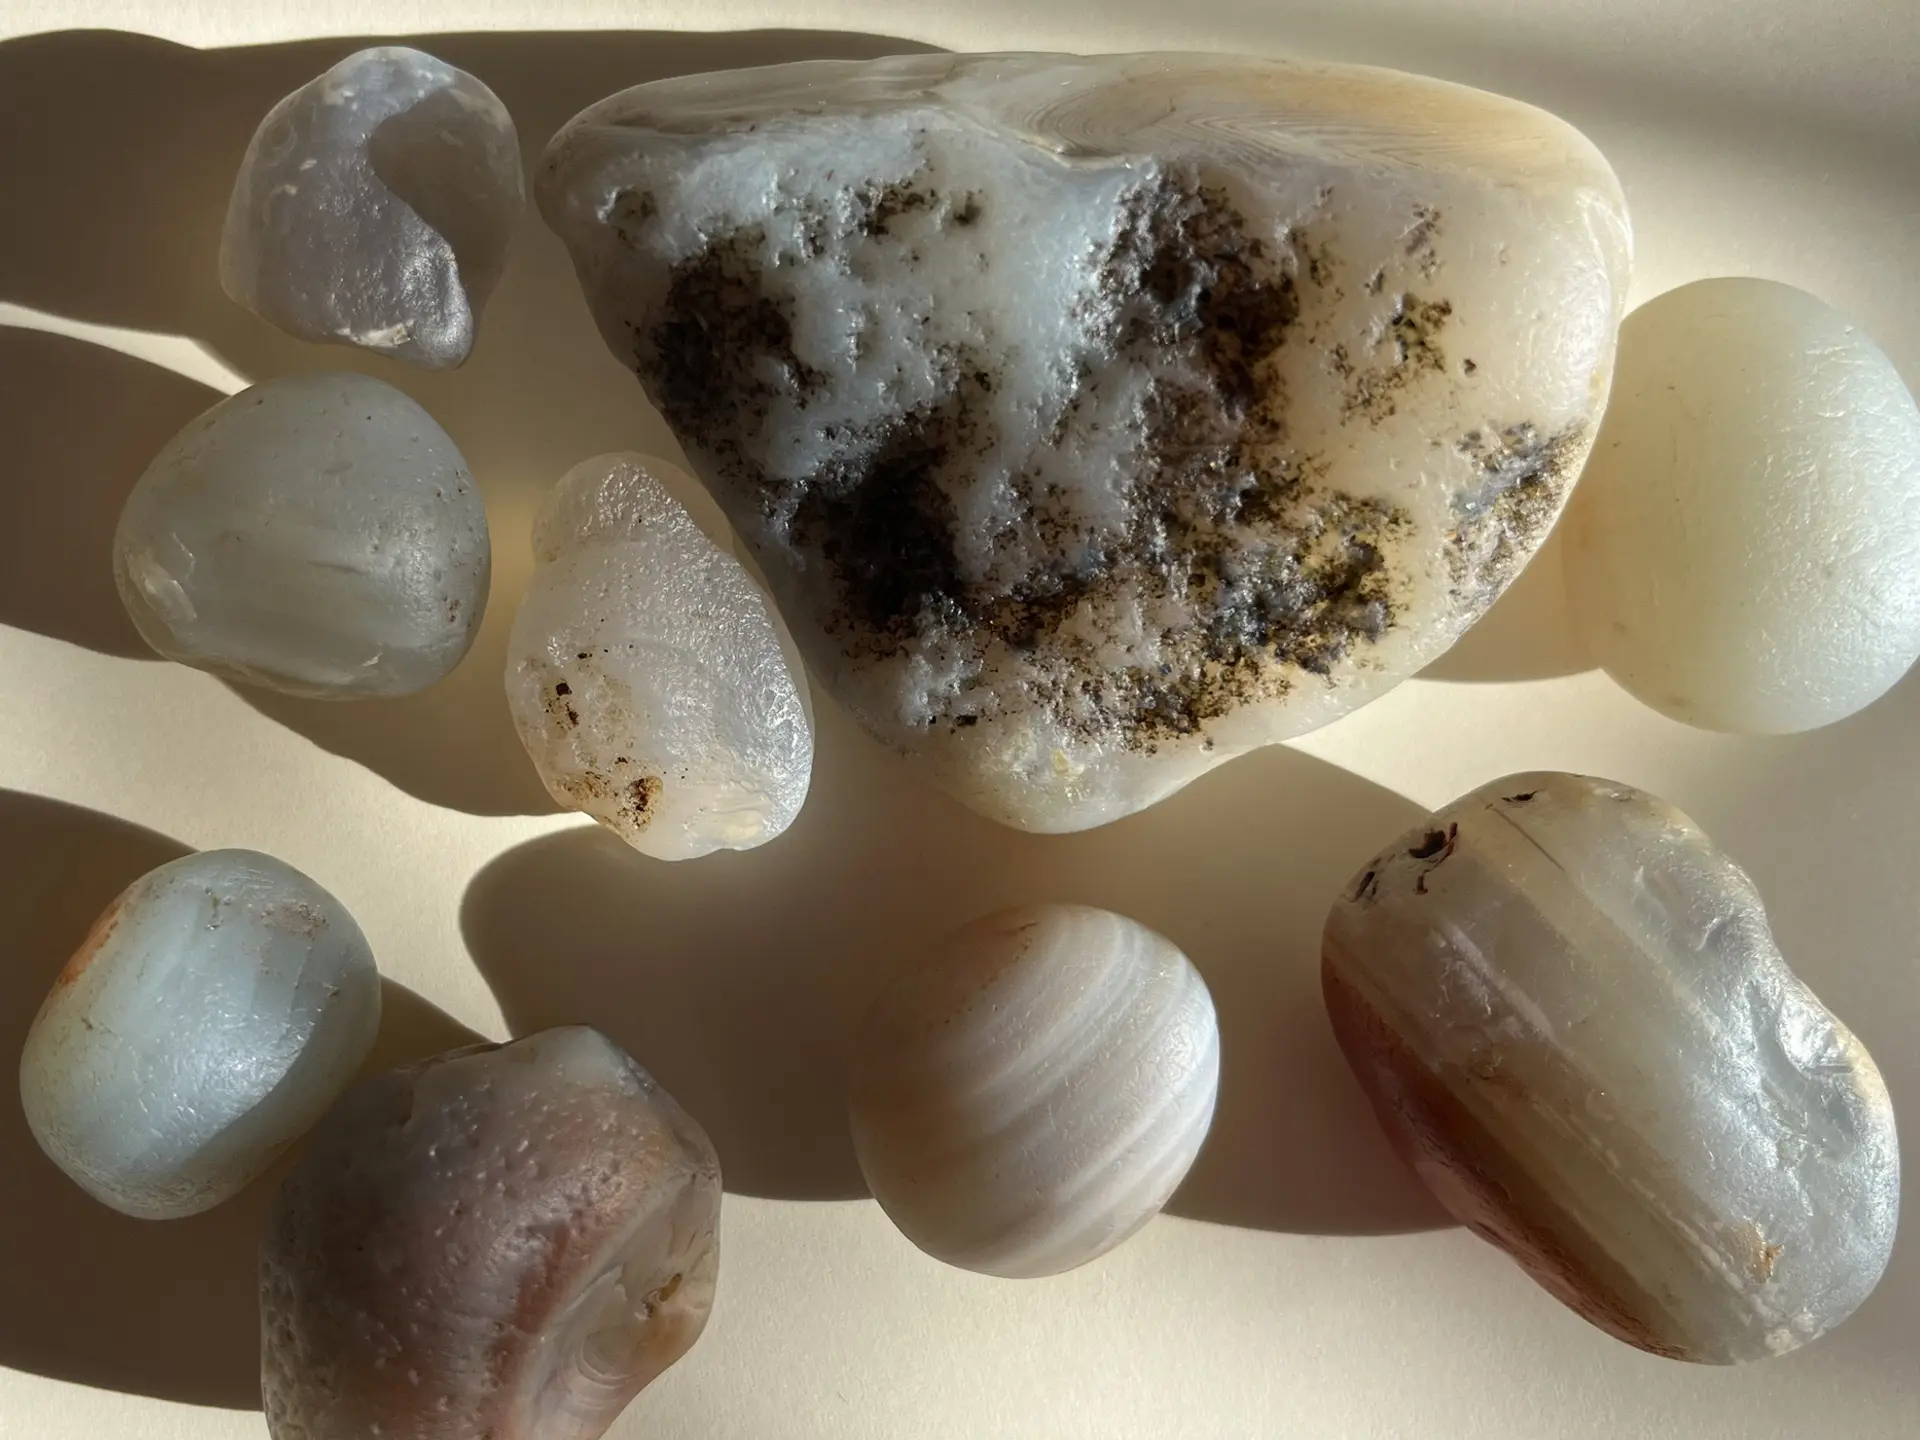 A collection of nine agate stones. They vary in size and pattern and are displayed in sunlight, casting shadows across the image.